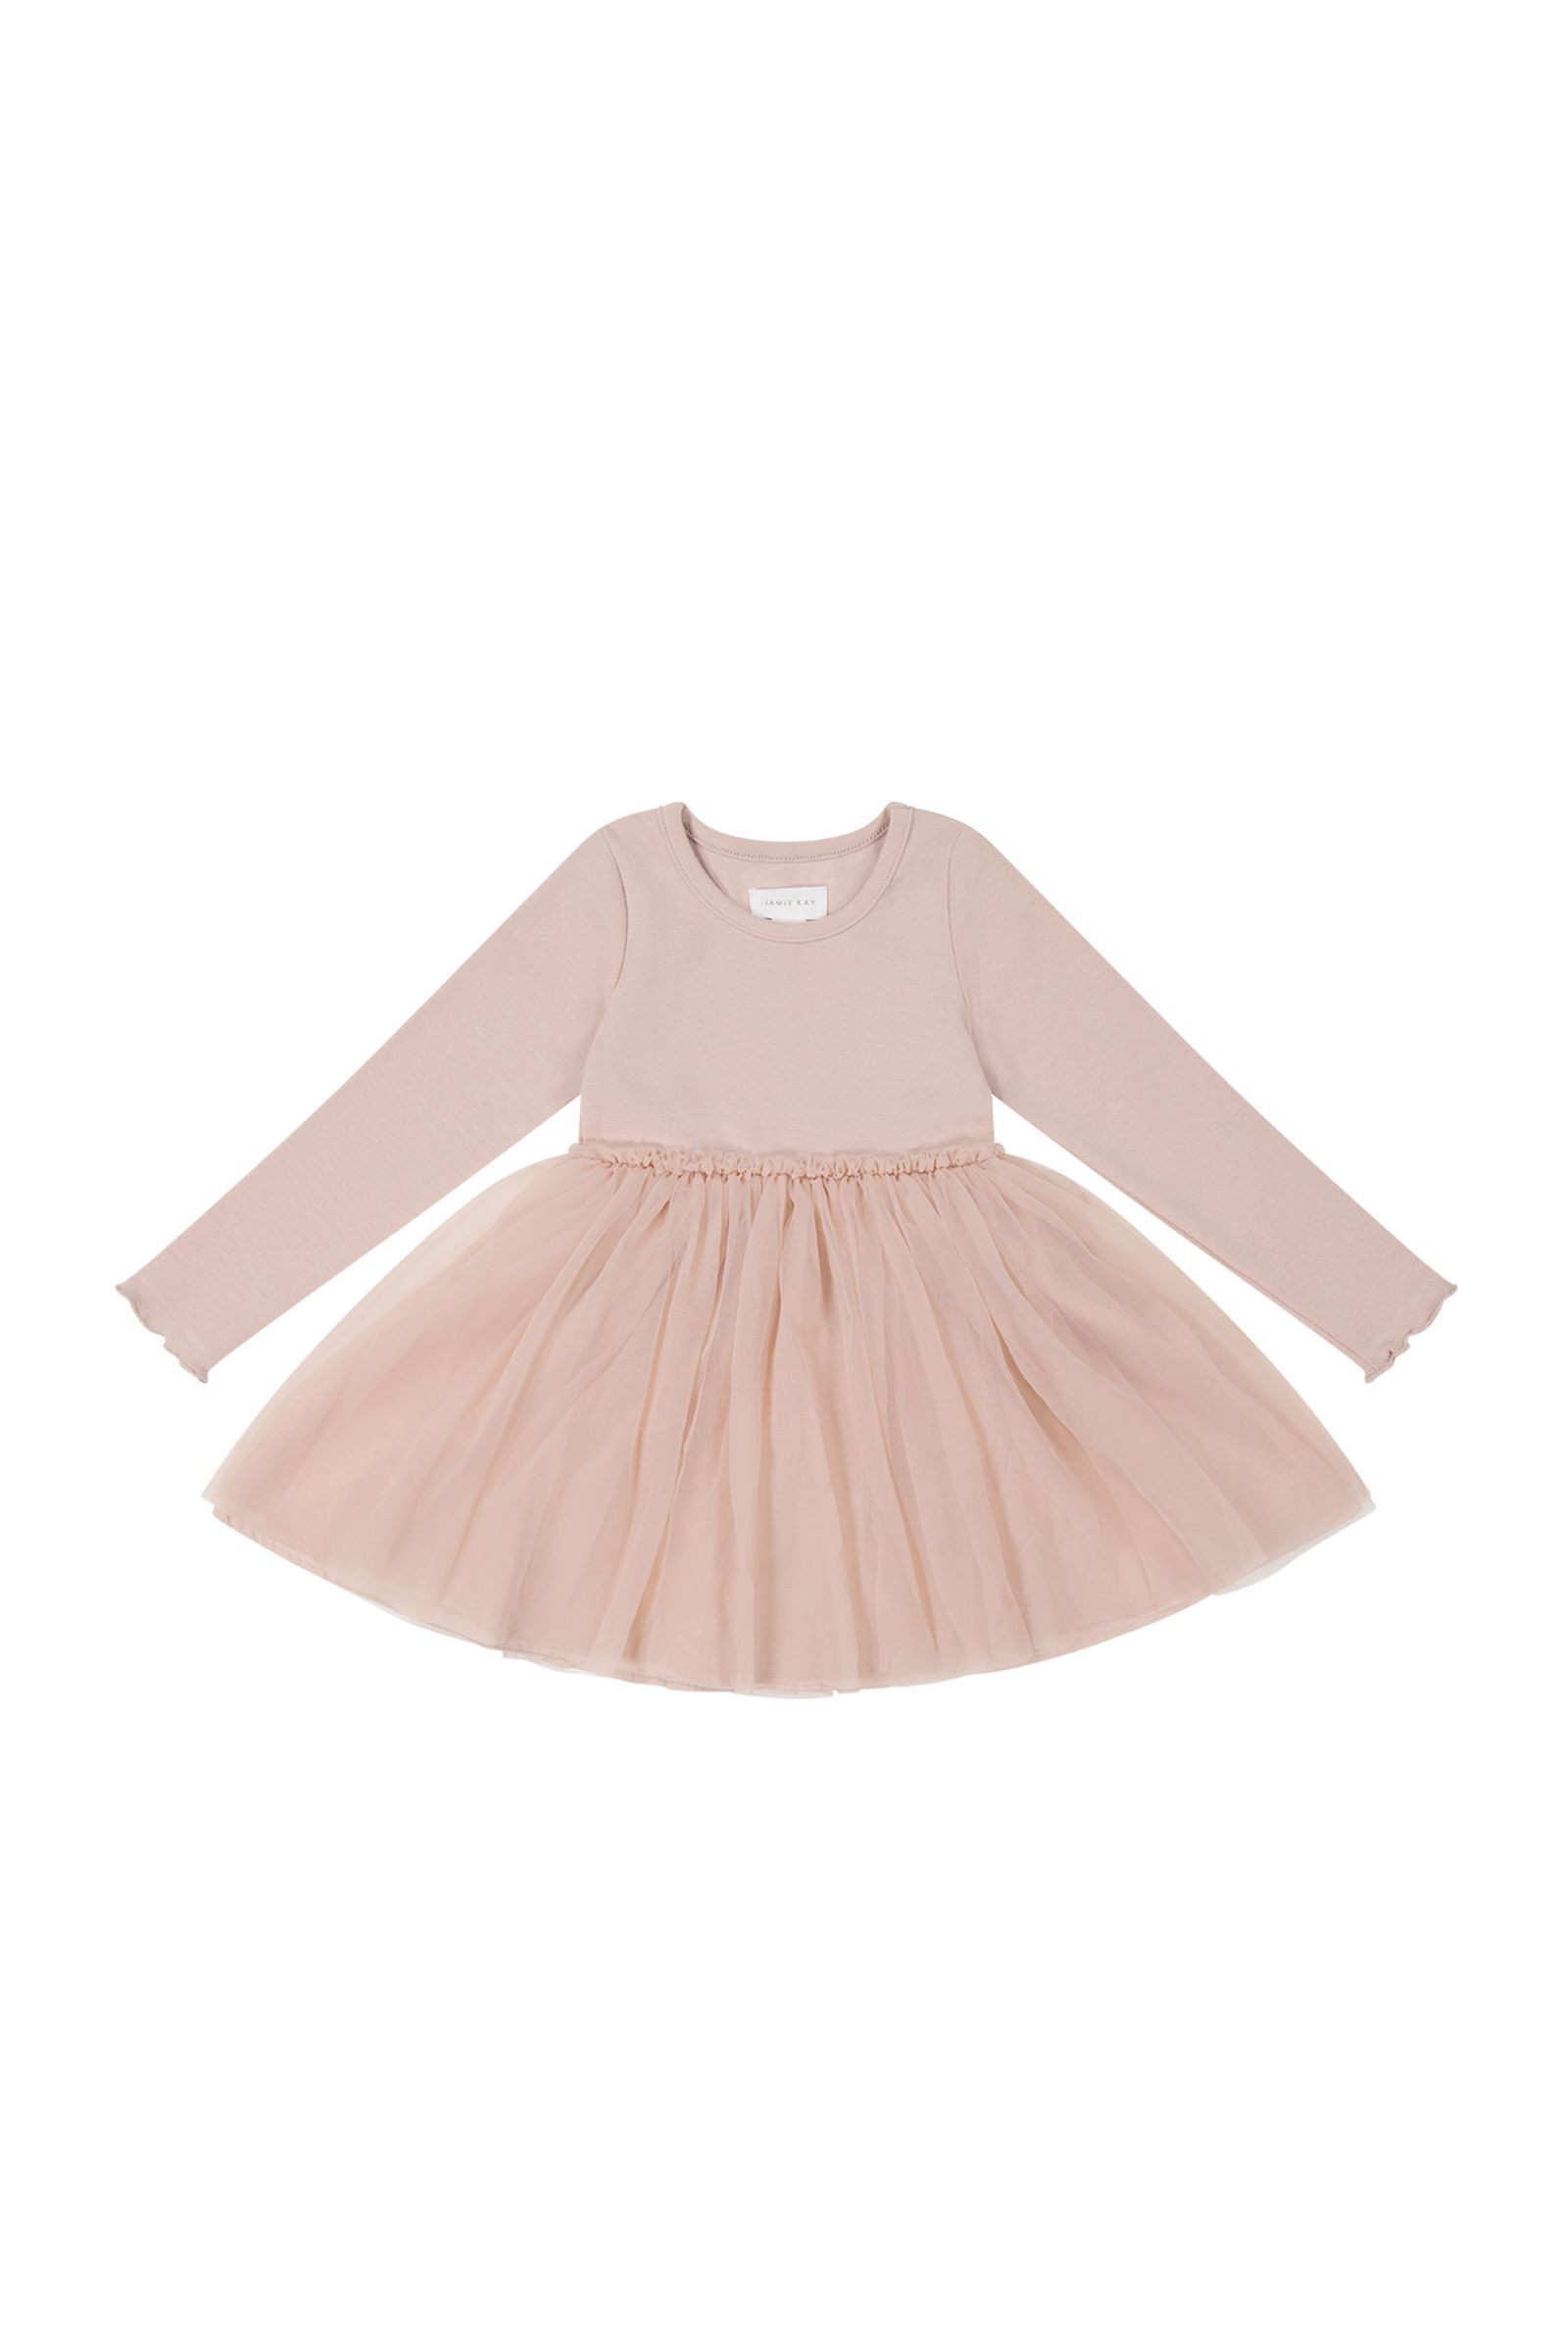 jamie kay october 2023 fleur collection anna tulle dress - rosewater